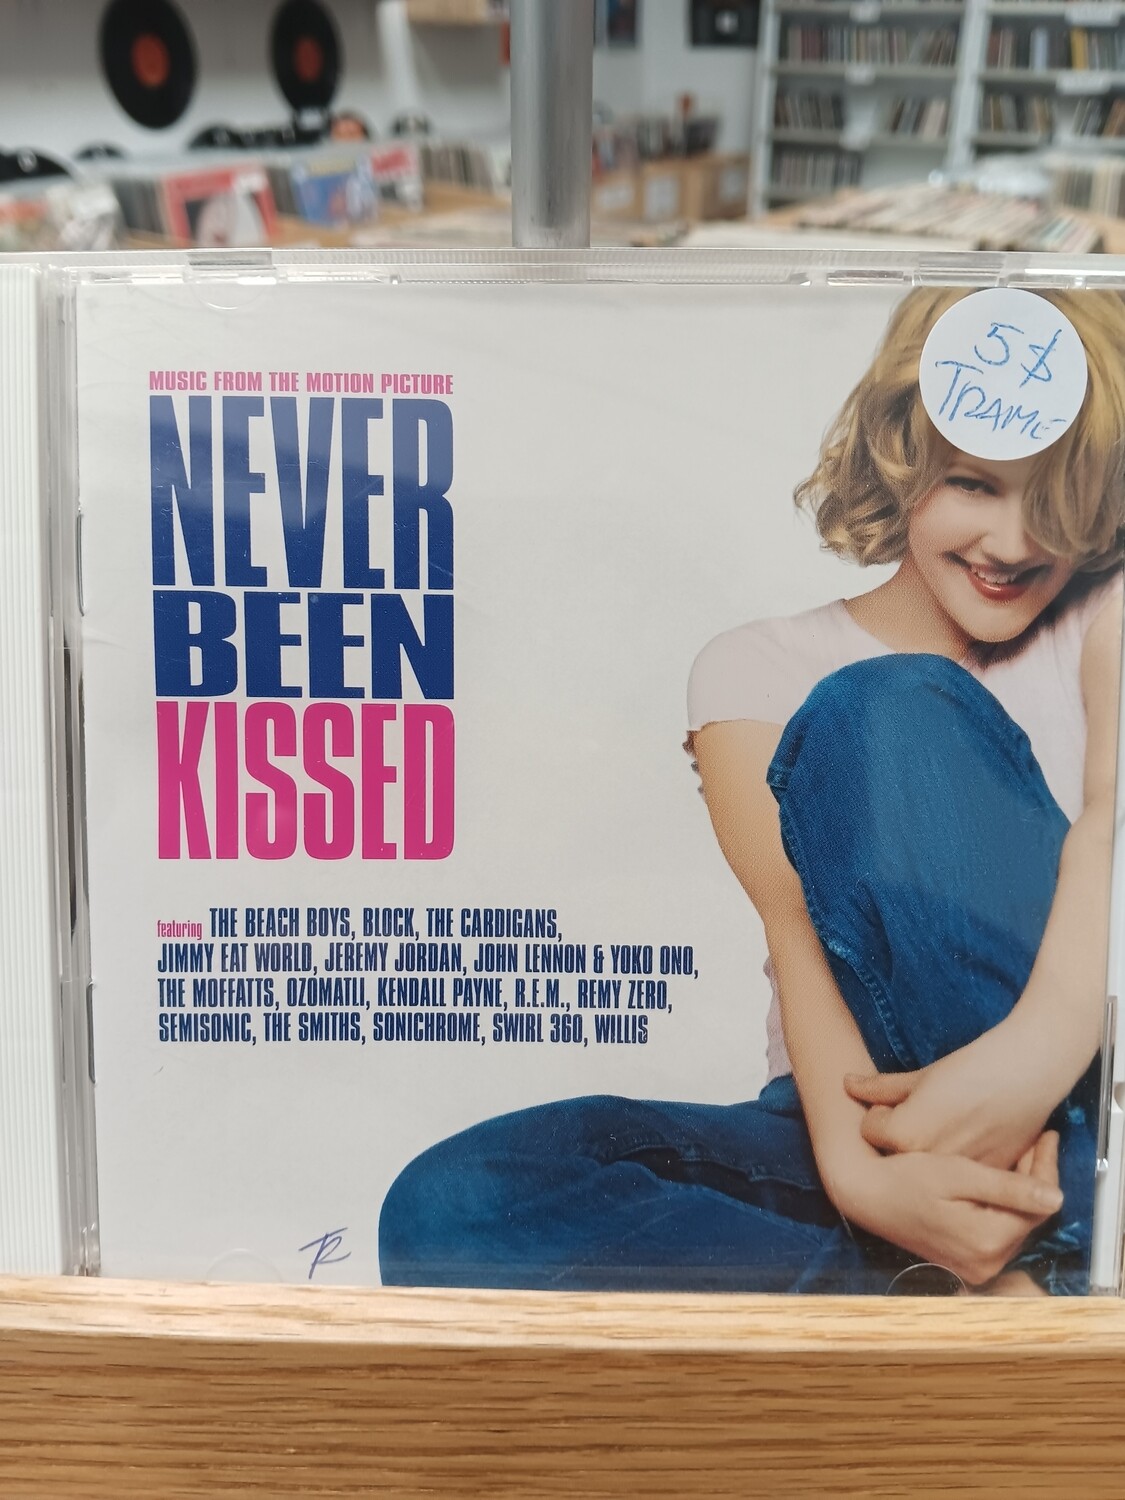 VARIOUS - Never been kissed soundtrack (CD)